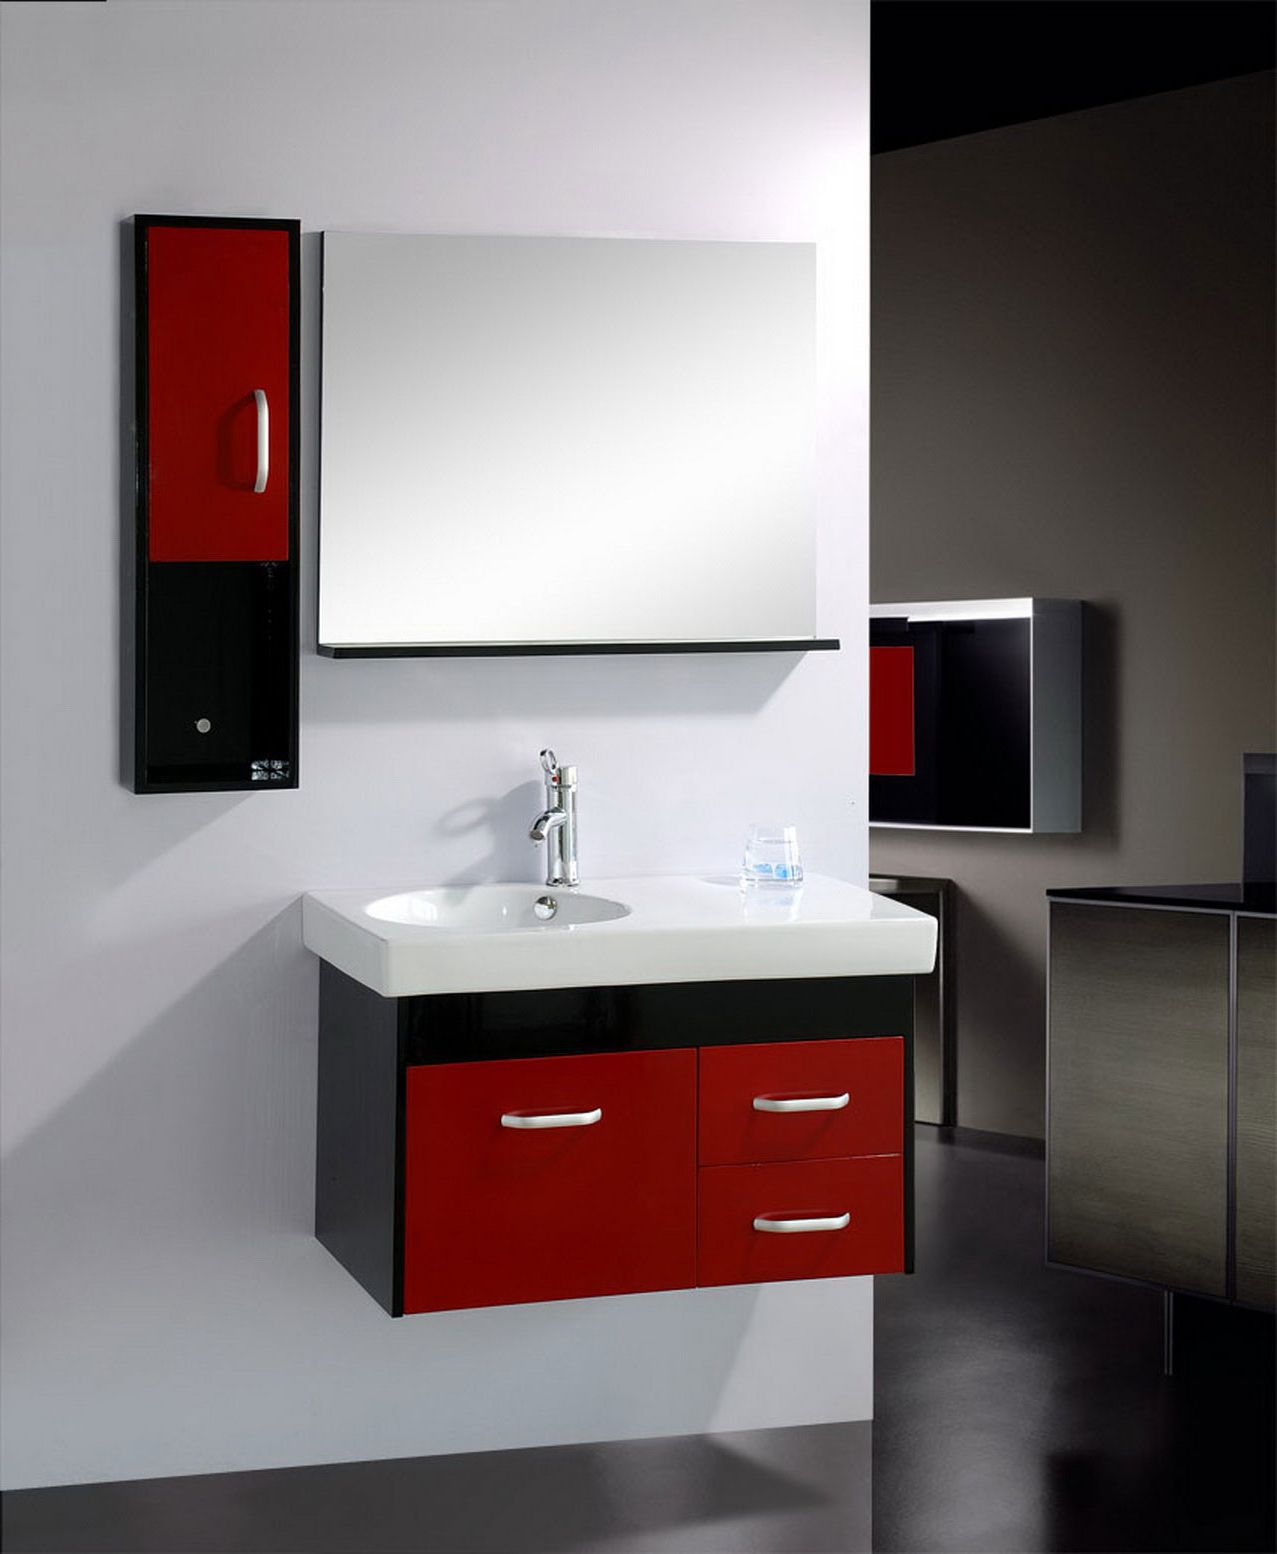 Drawers Mirror Round Ideas Thin Wall Bath Full Long Rectangular In 2019 Long Thin Wall Mirrors (View 19 of 20)